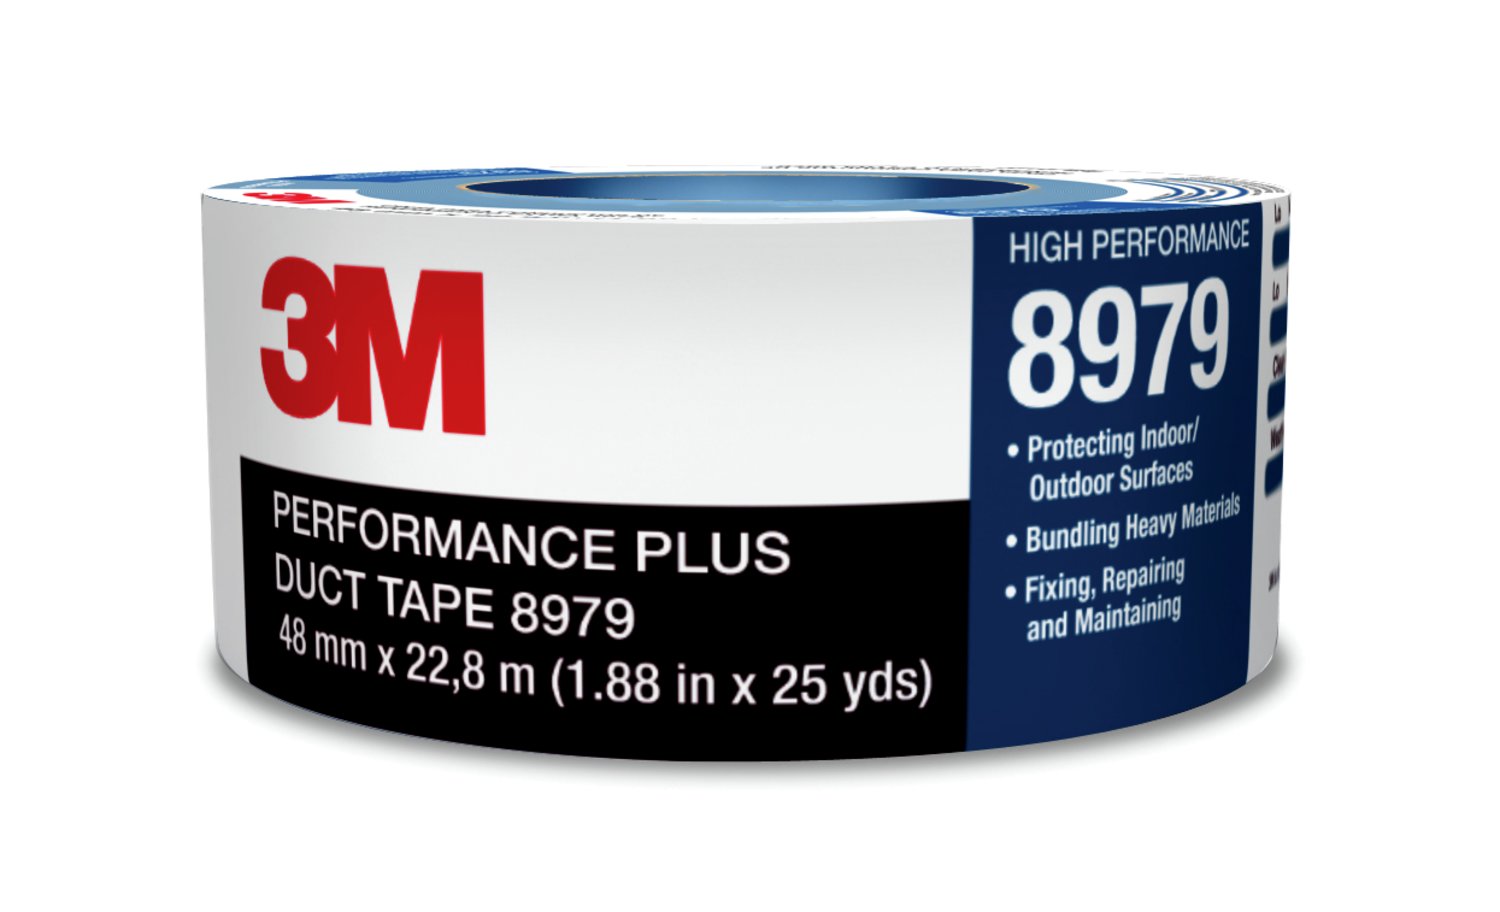 7100005781 - 3M Performance Plus Duct Tape 8979, Black, 29 in x 60 yd, 12.1 mil,
1/Case